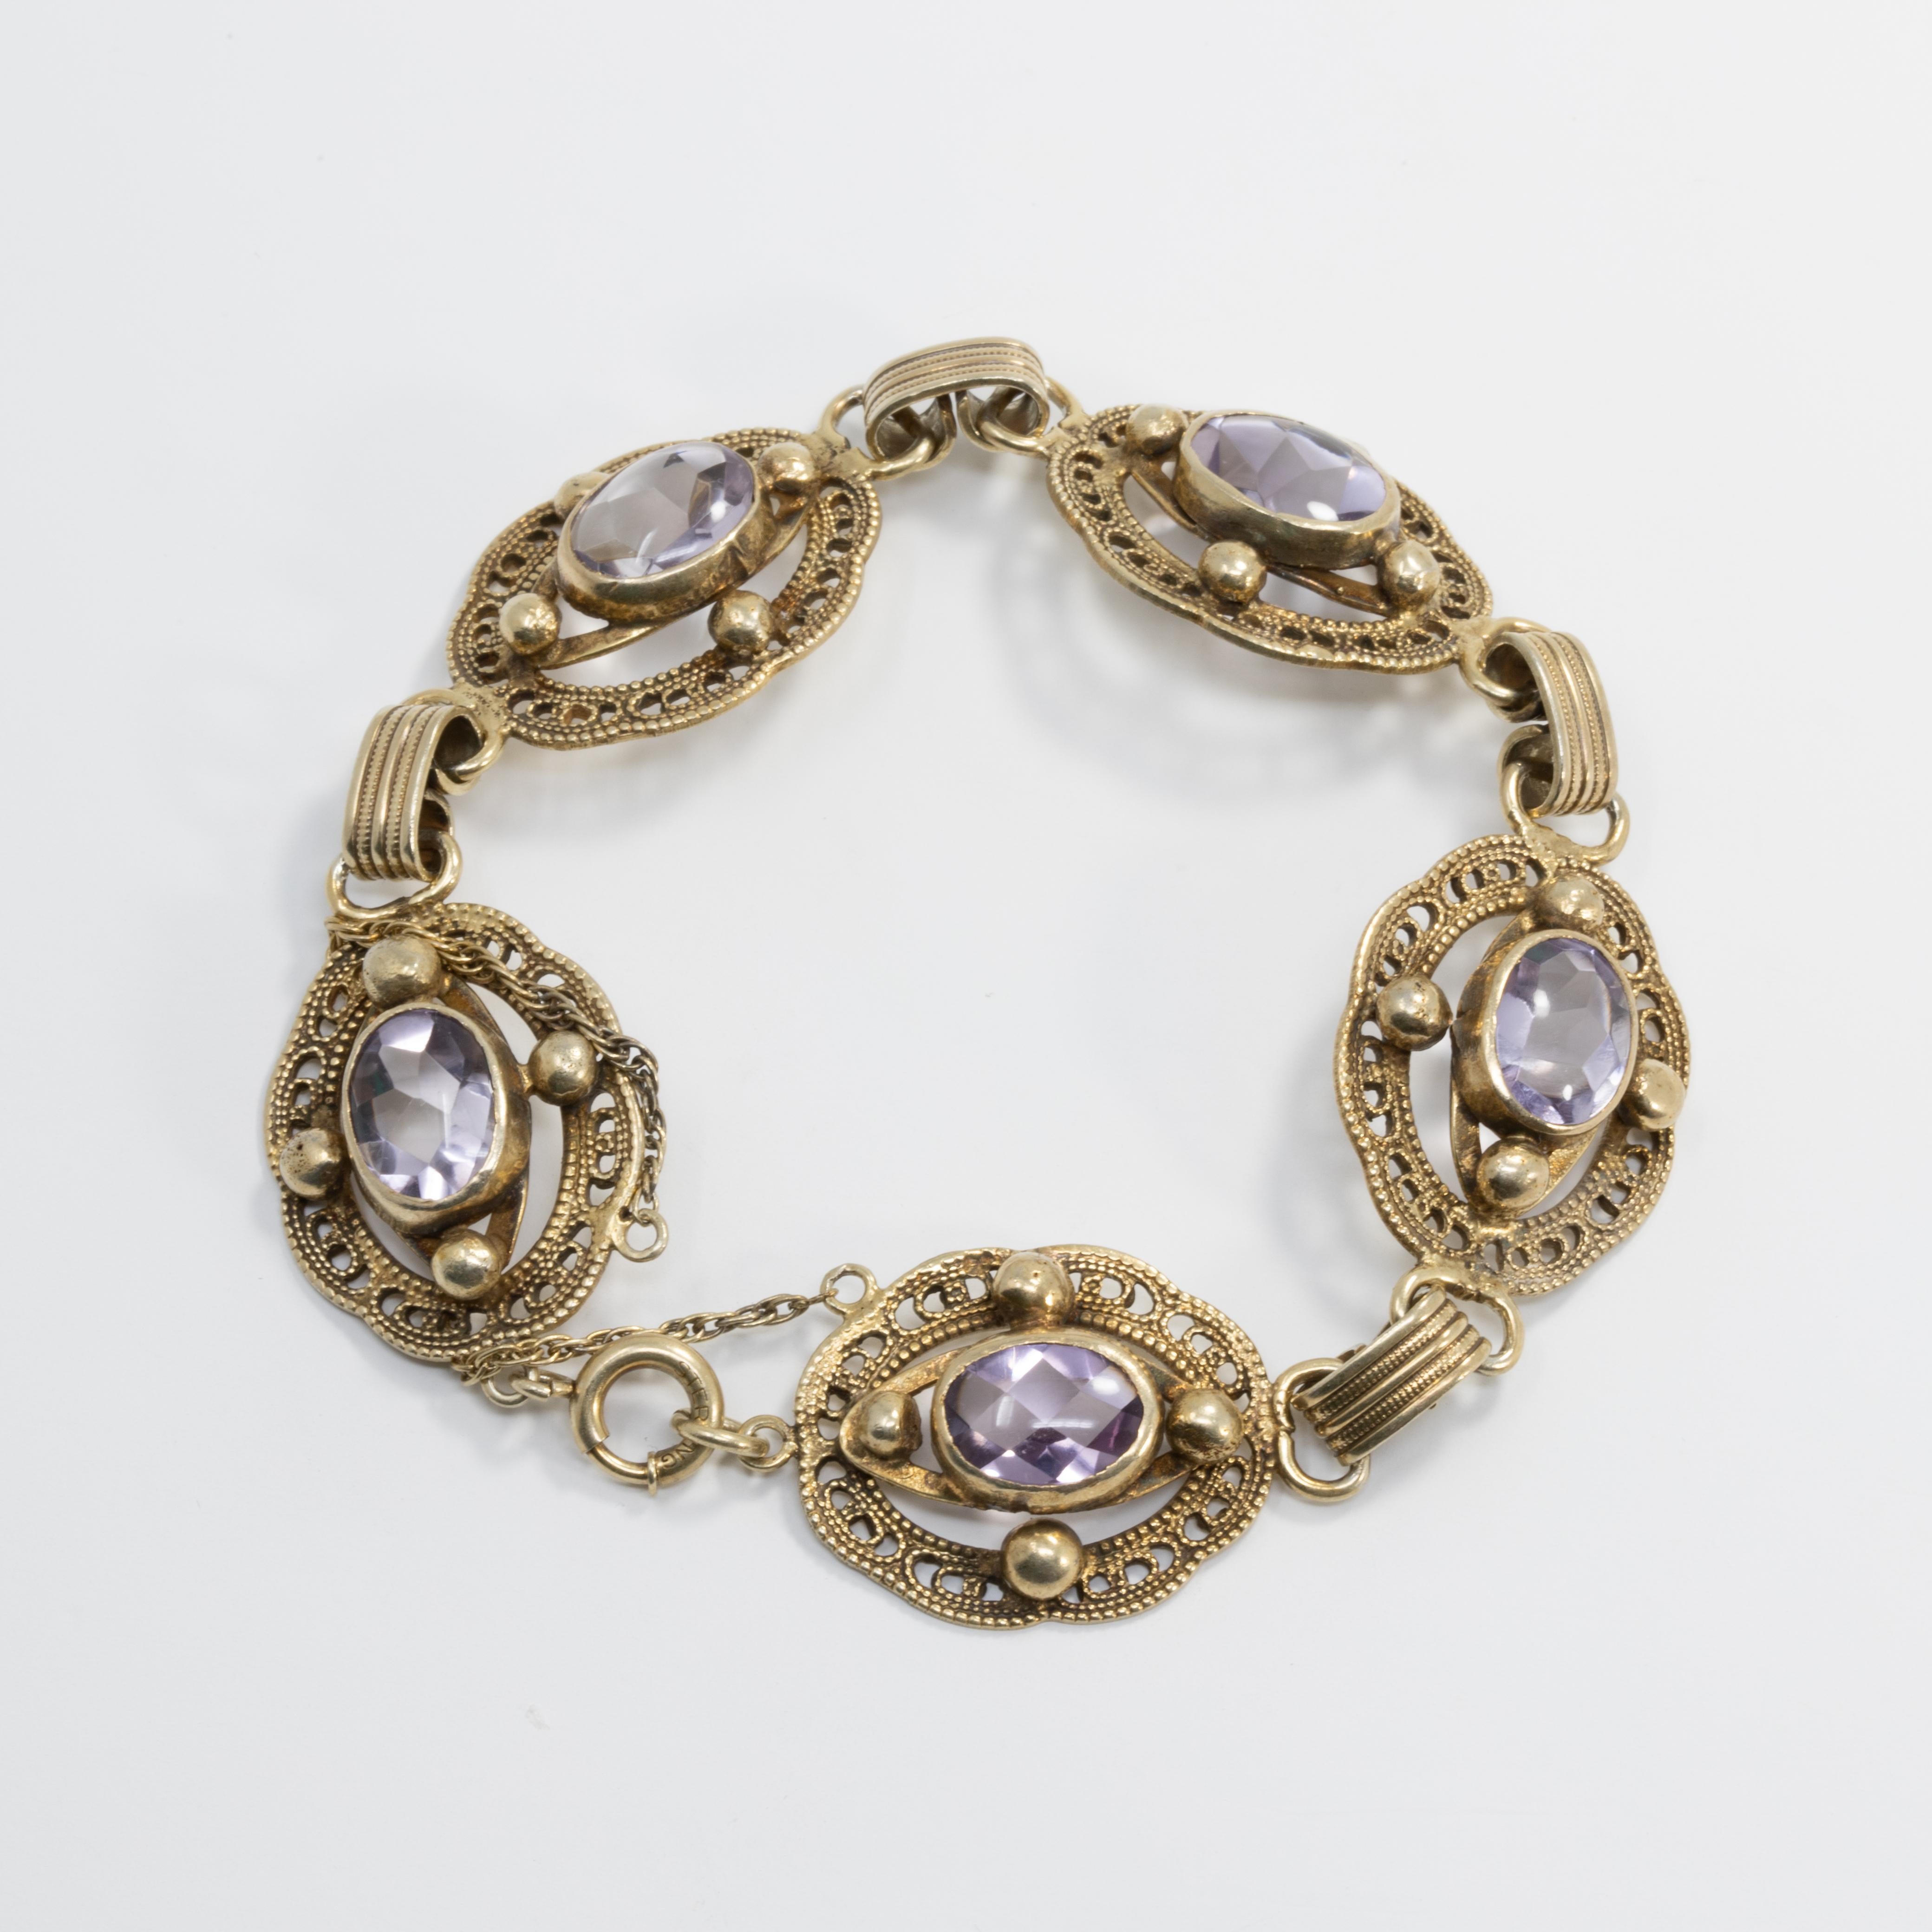 An elegant vintage bracelet. This stylish accessory features five links, each with a single amethyst bezel-set in a decorative metal setting. Fastened with a springring clasp and safety chain. Hallmarked as sterling.